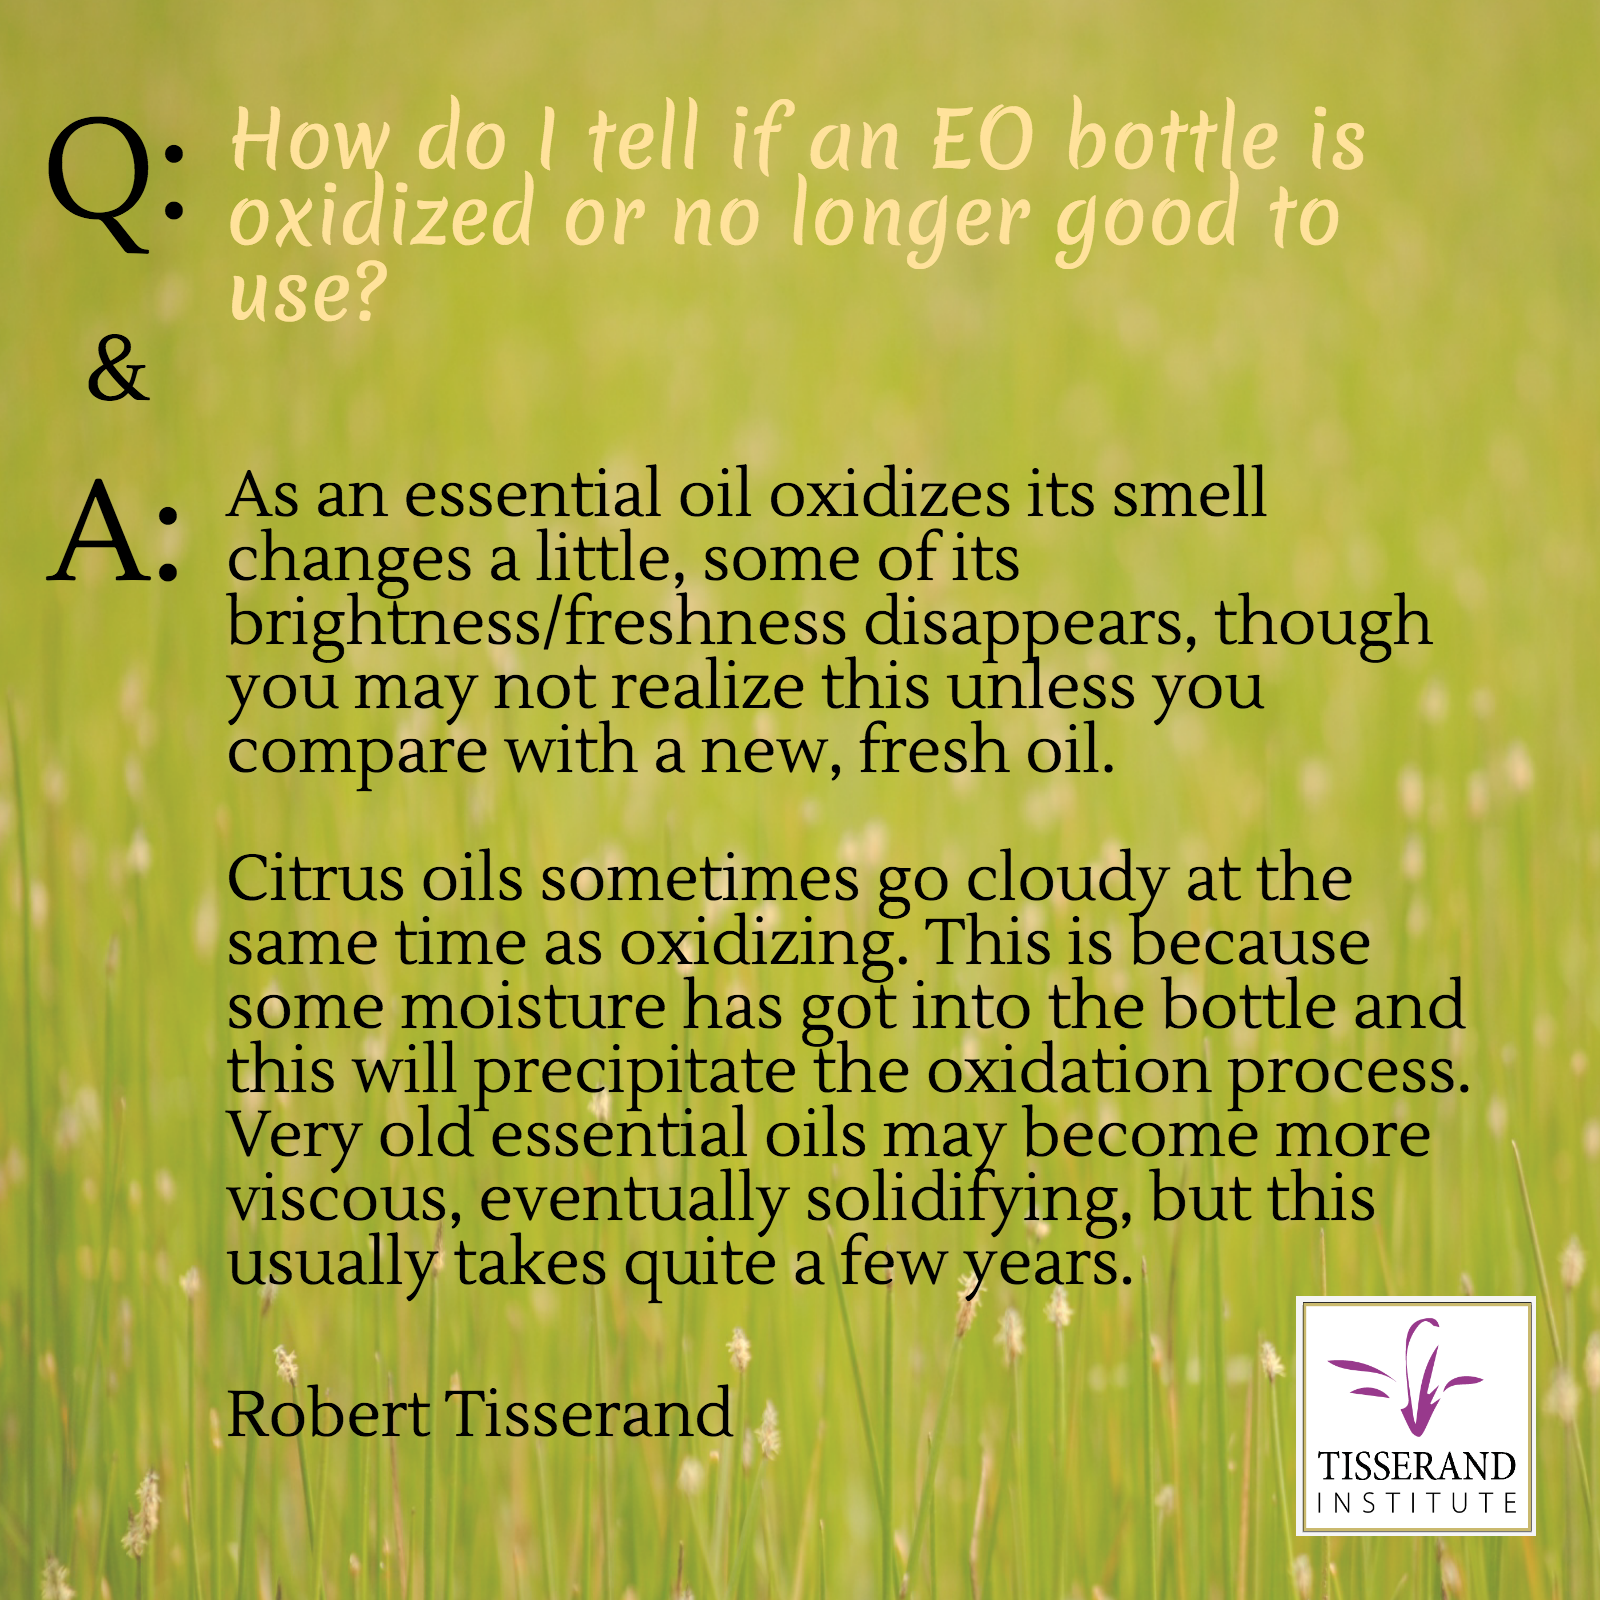 Is my bottle of essential oil oxidized or no longer good to use?